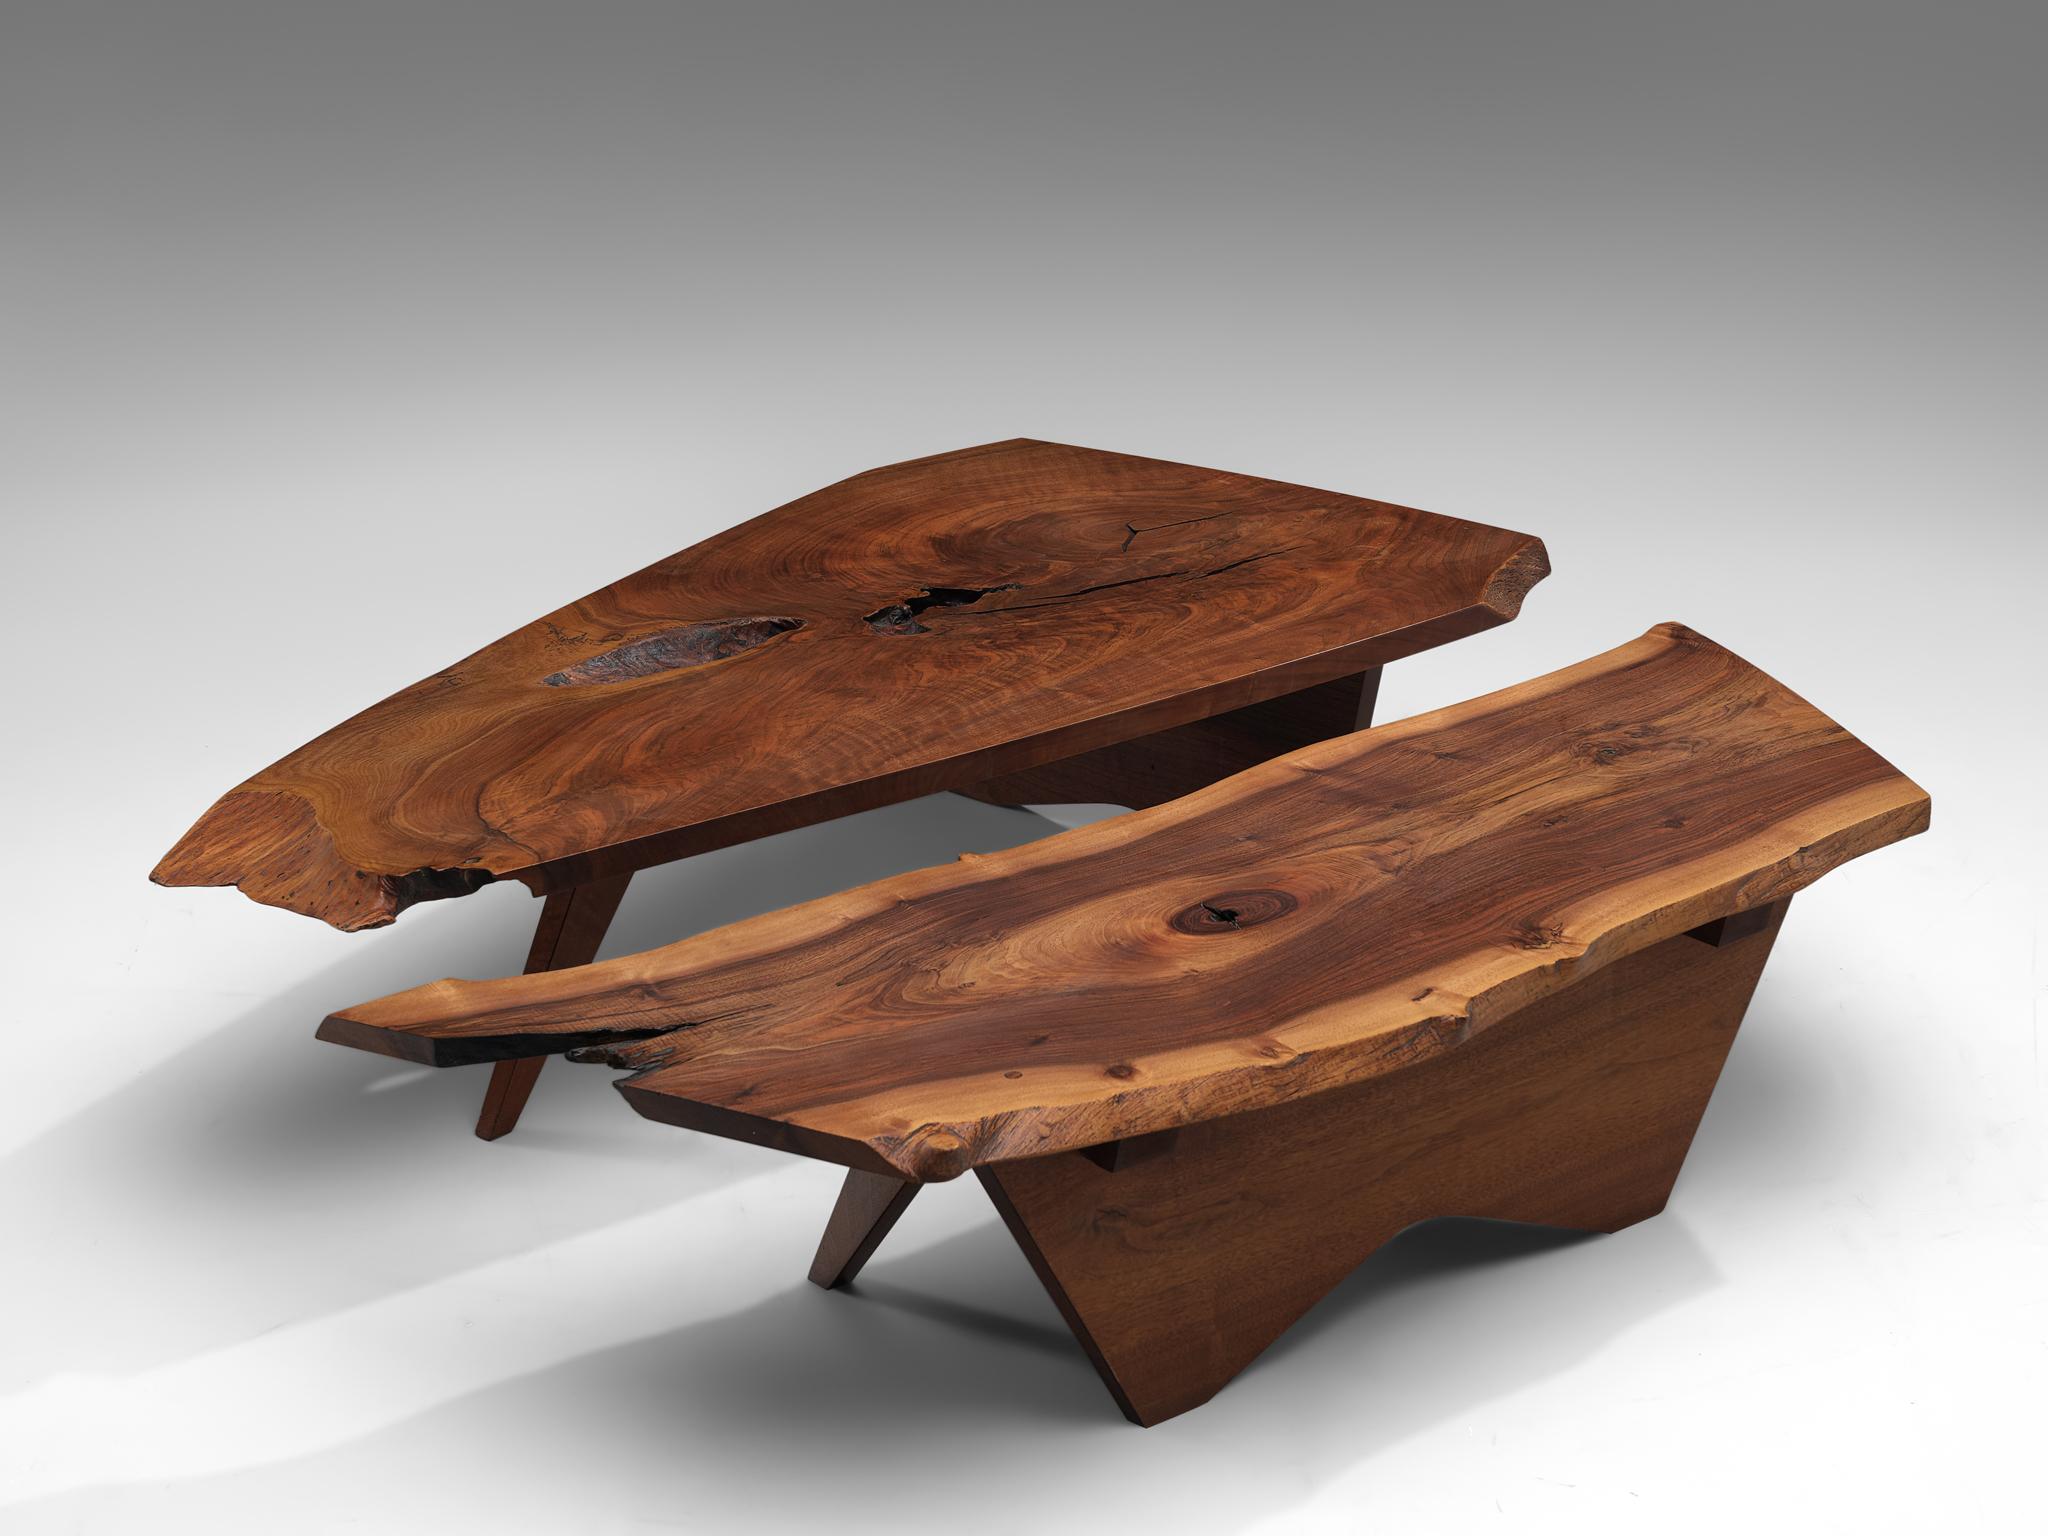 George Nakashima, two Slab coffee tables, American walnut, United States, 1960s

Two slab coffee tables made of a solid board top. The coffee tables are designed by George Nakashima to express the character of a particular slab. The first table is